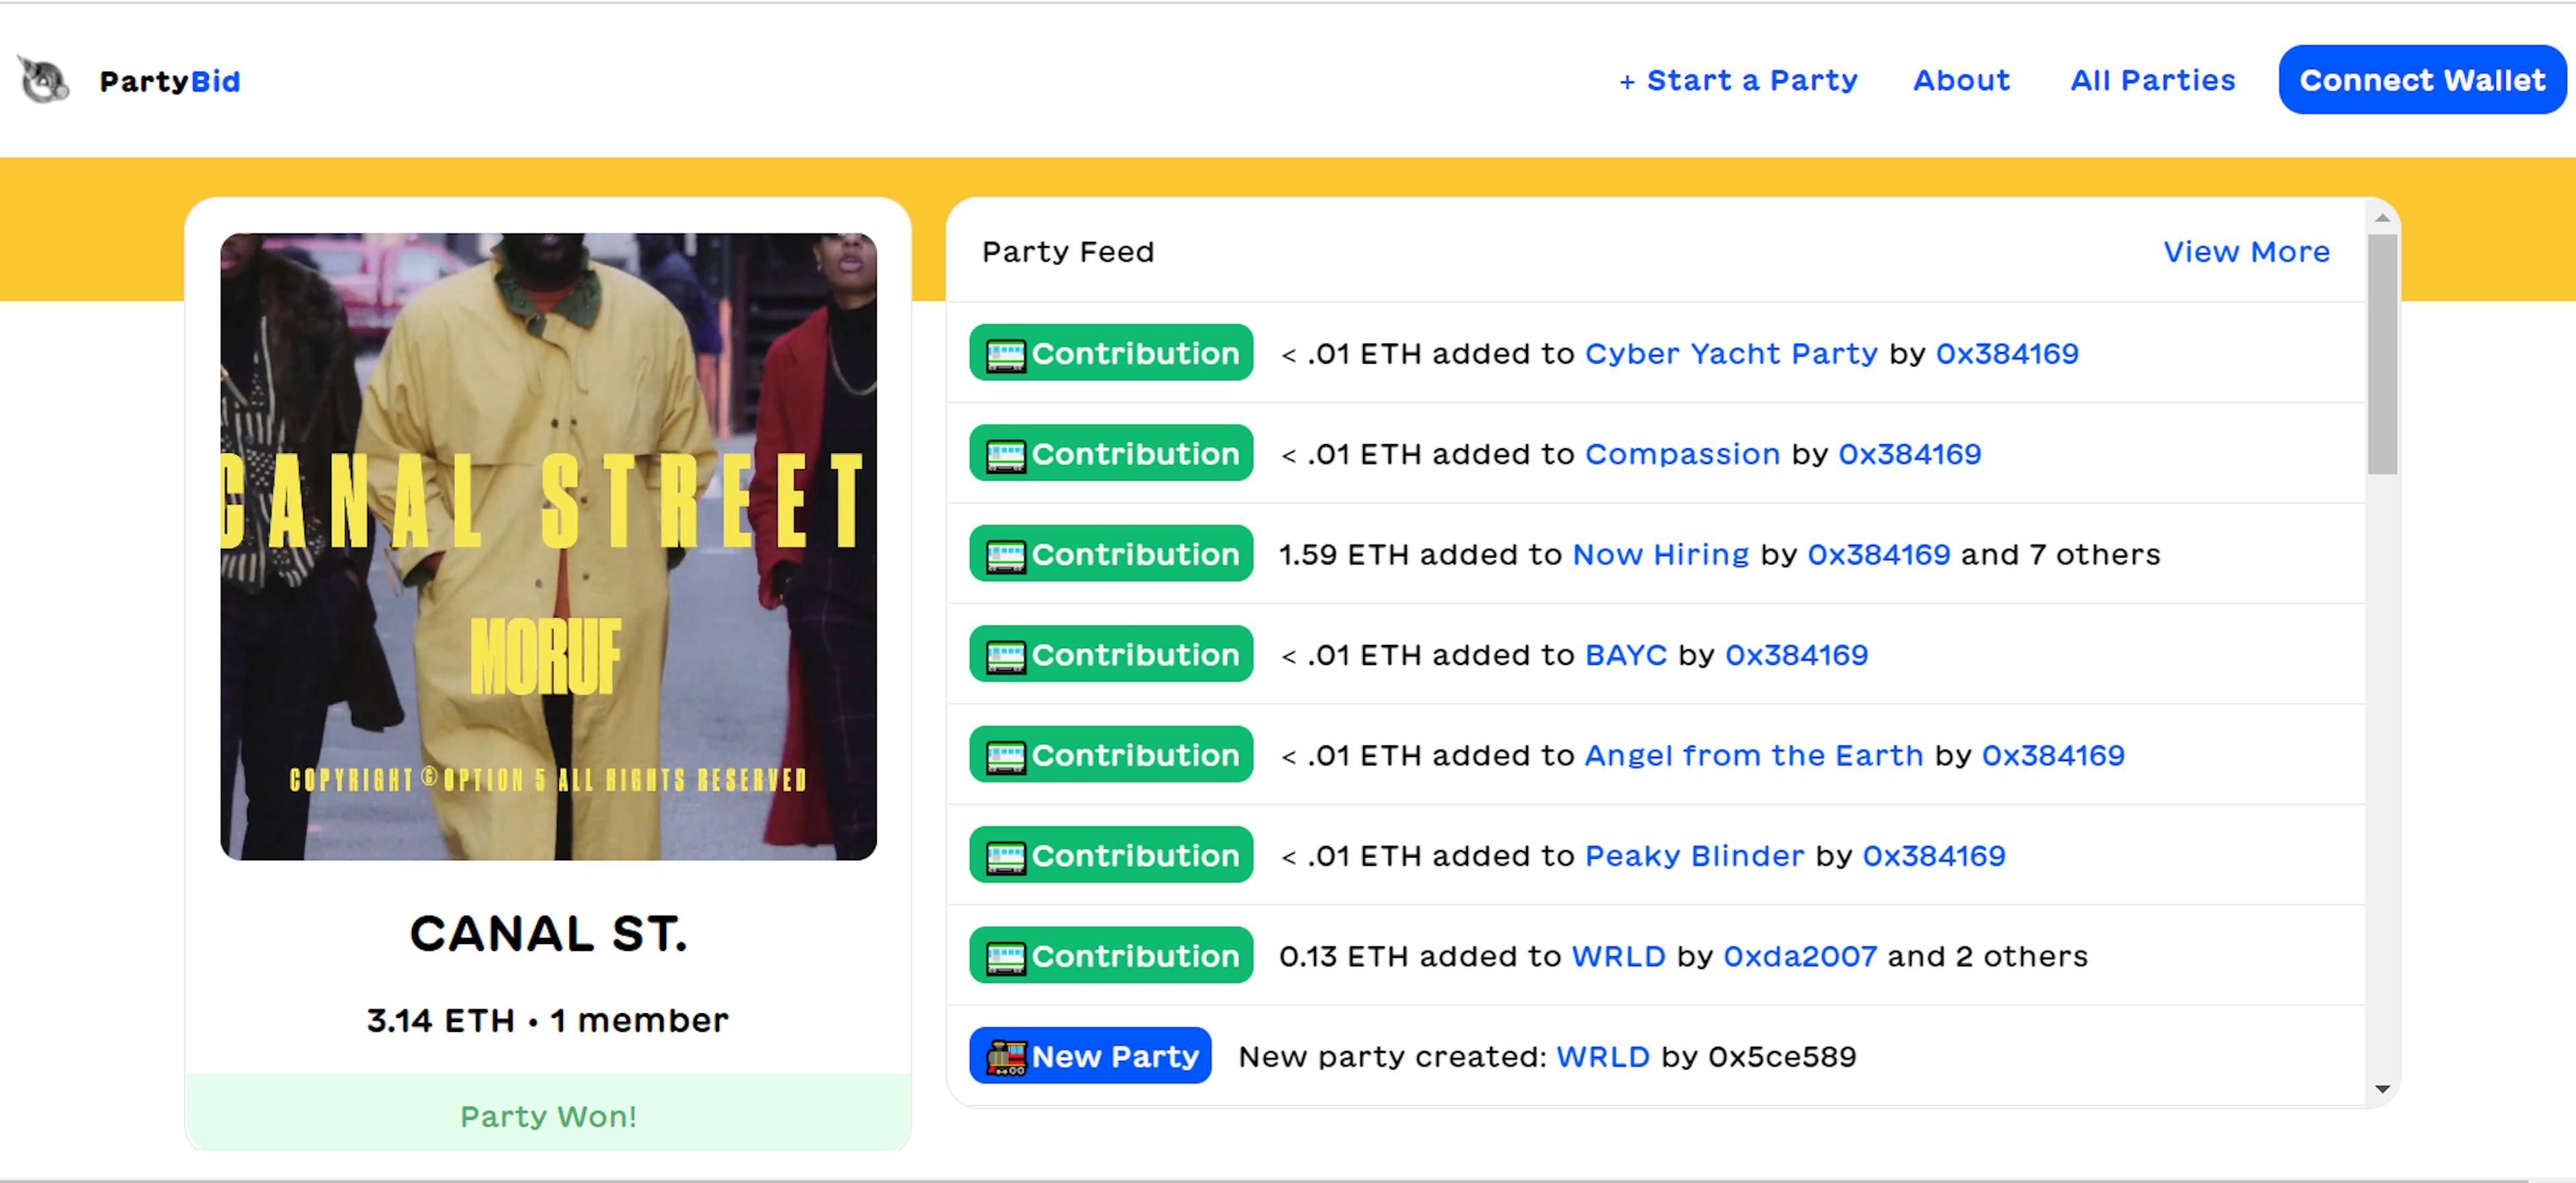 PartyBid provides a live feed of ongoing bids